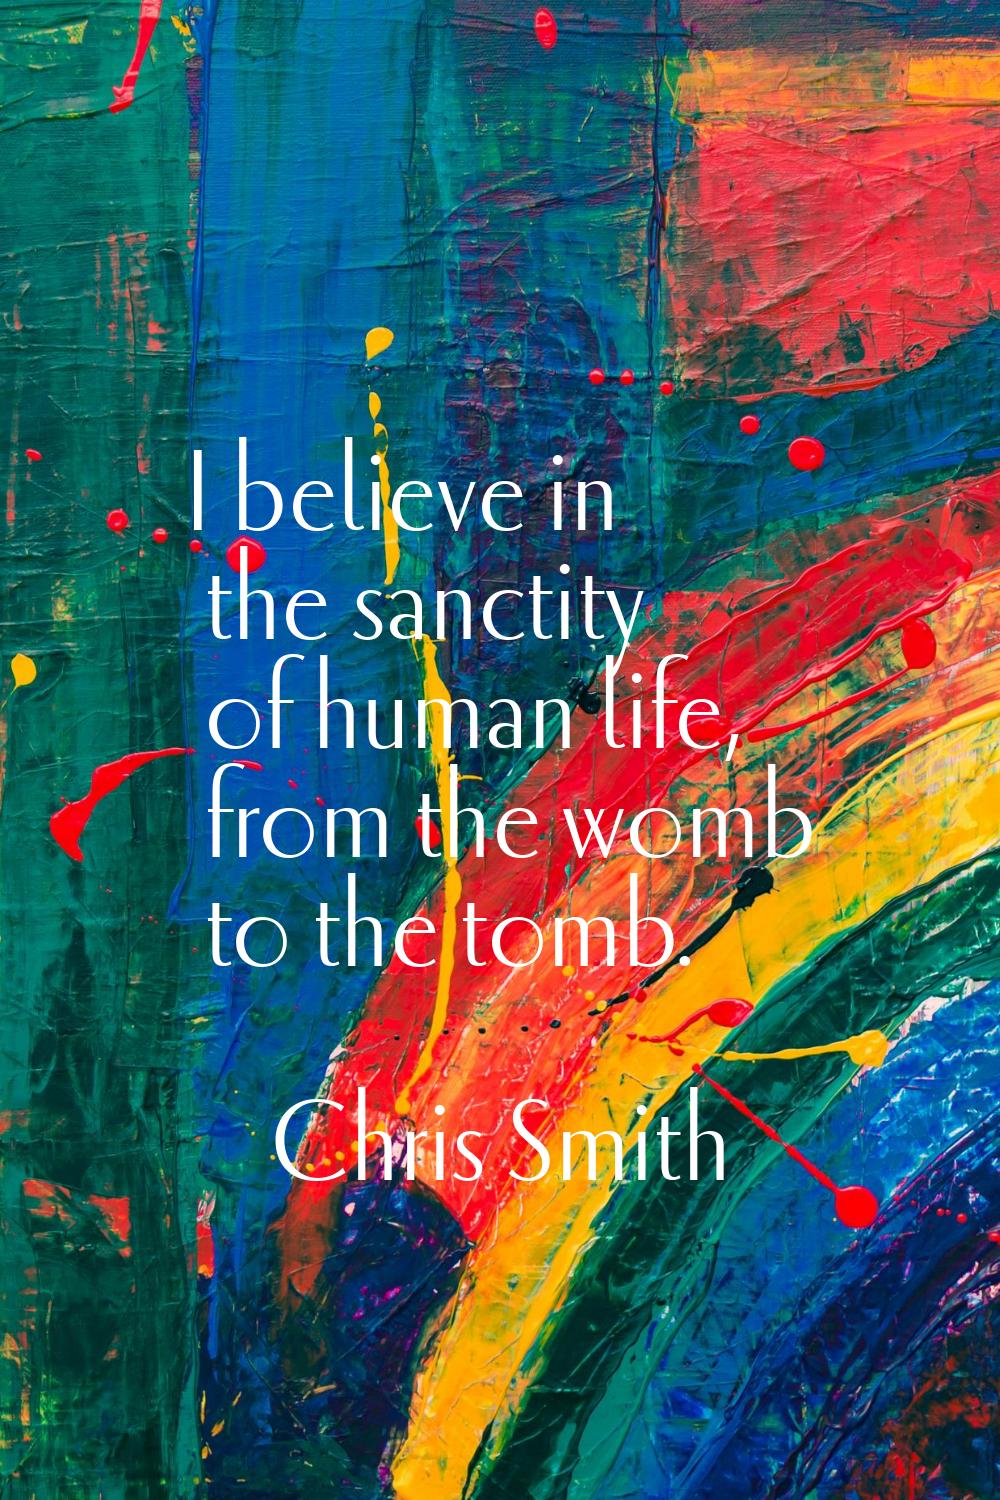 I believe in the sanctity of human life, from the womb to the tomb.